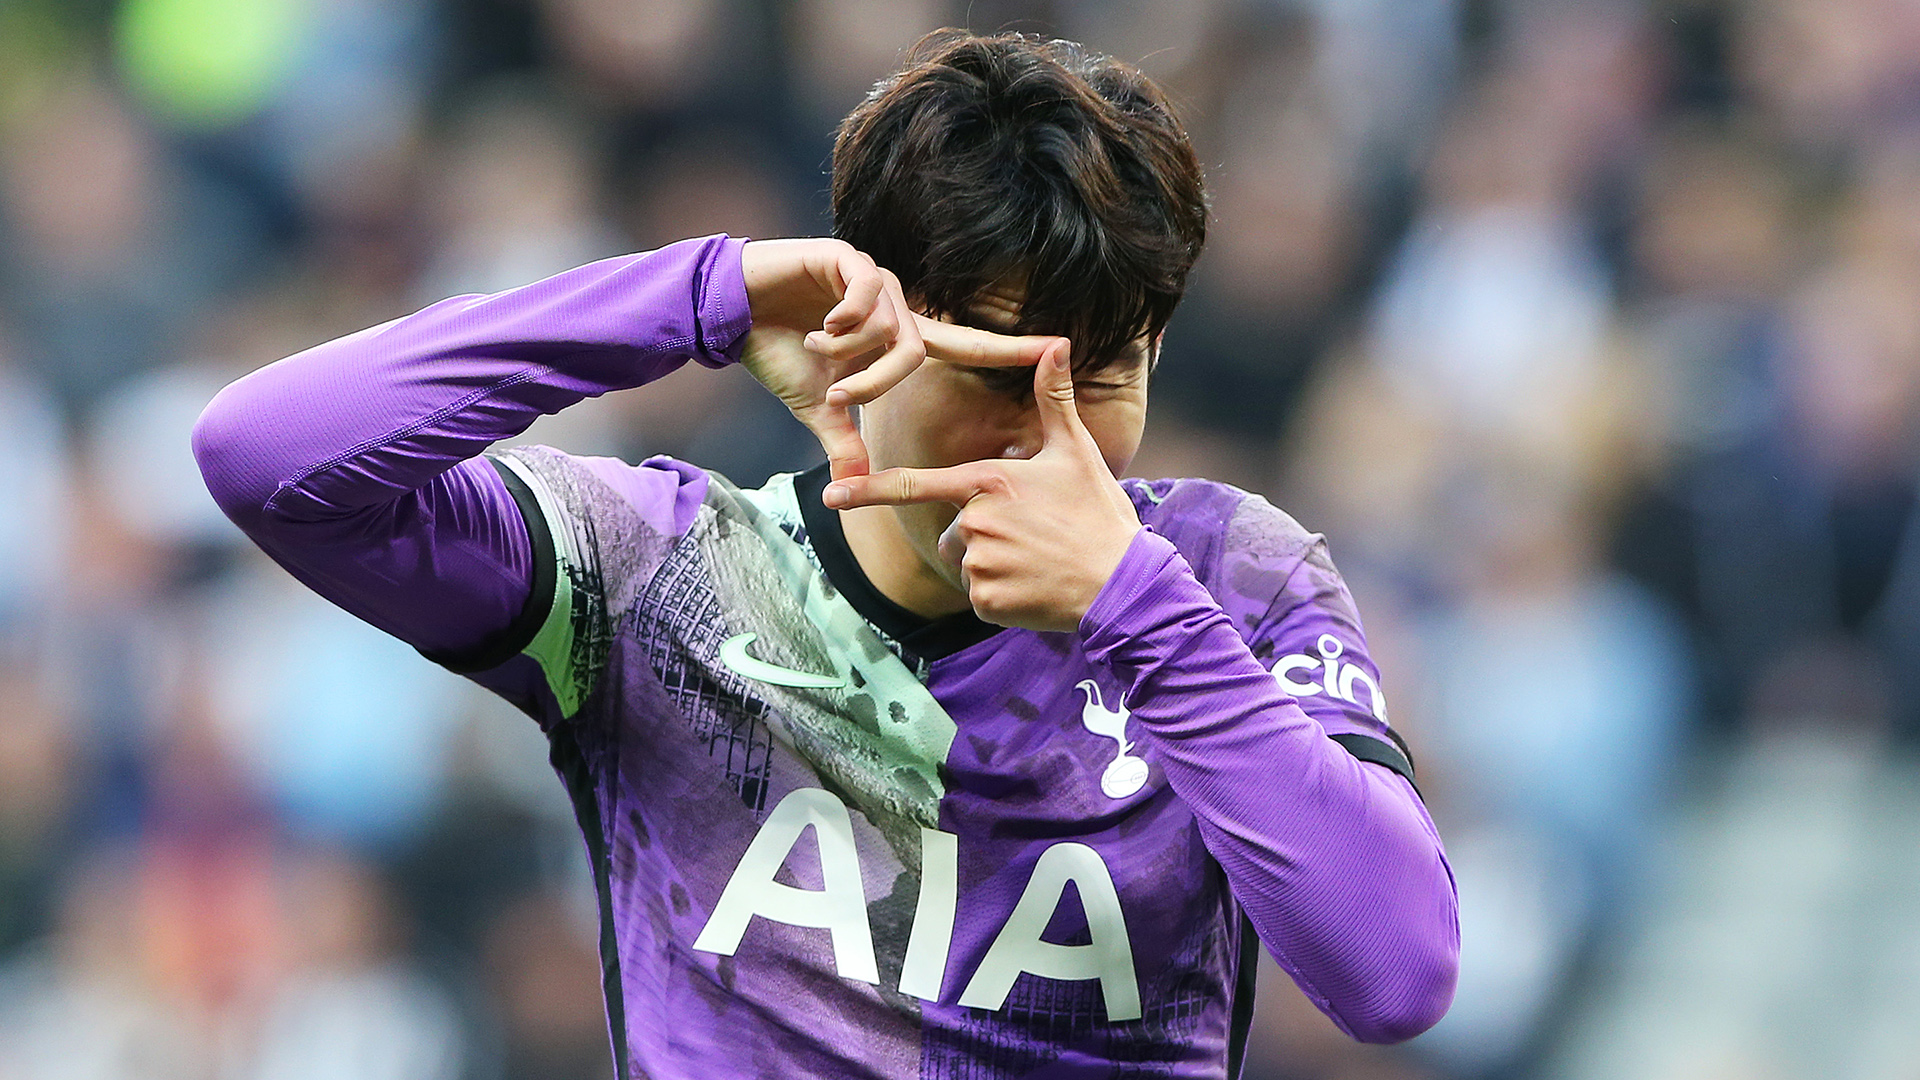 Spurs star Son told by his own father he needs 'top club' move to become 'world class'. Goal.com US